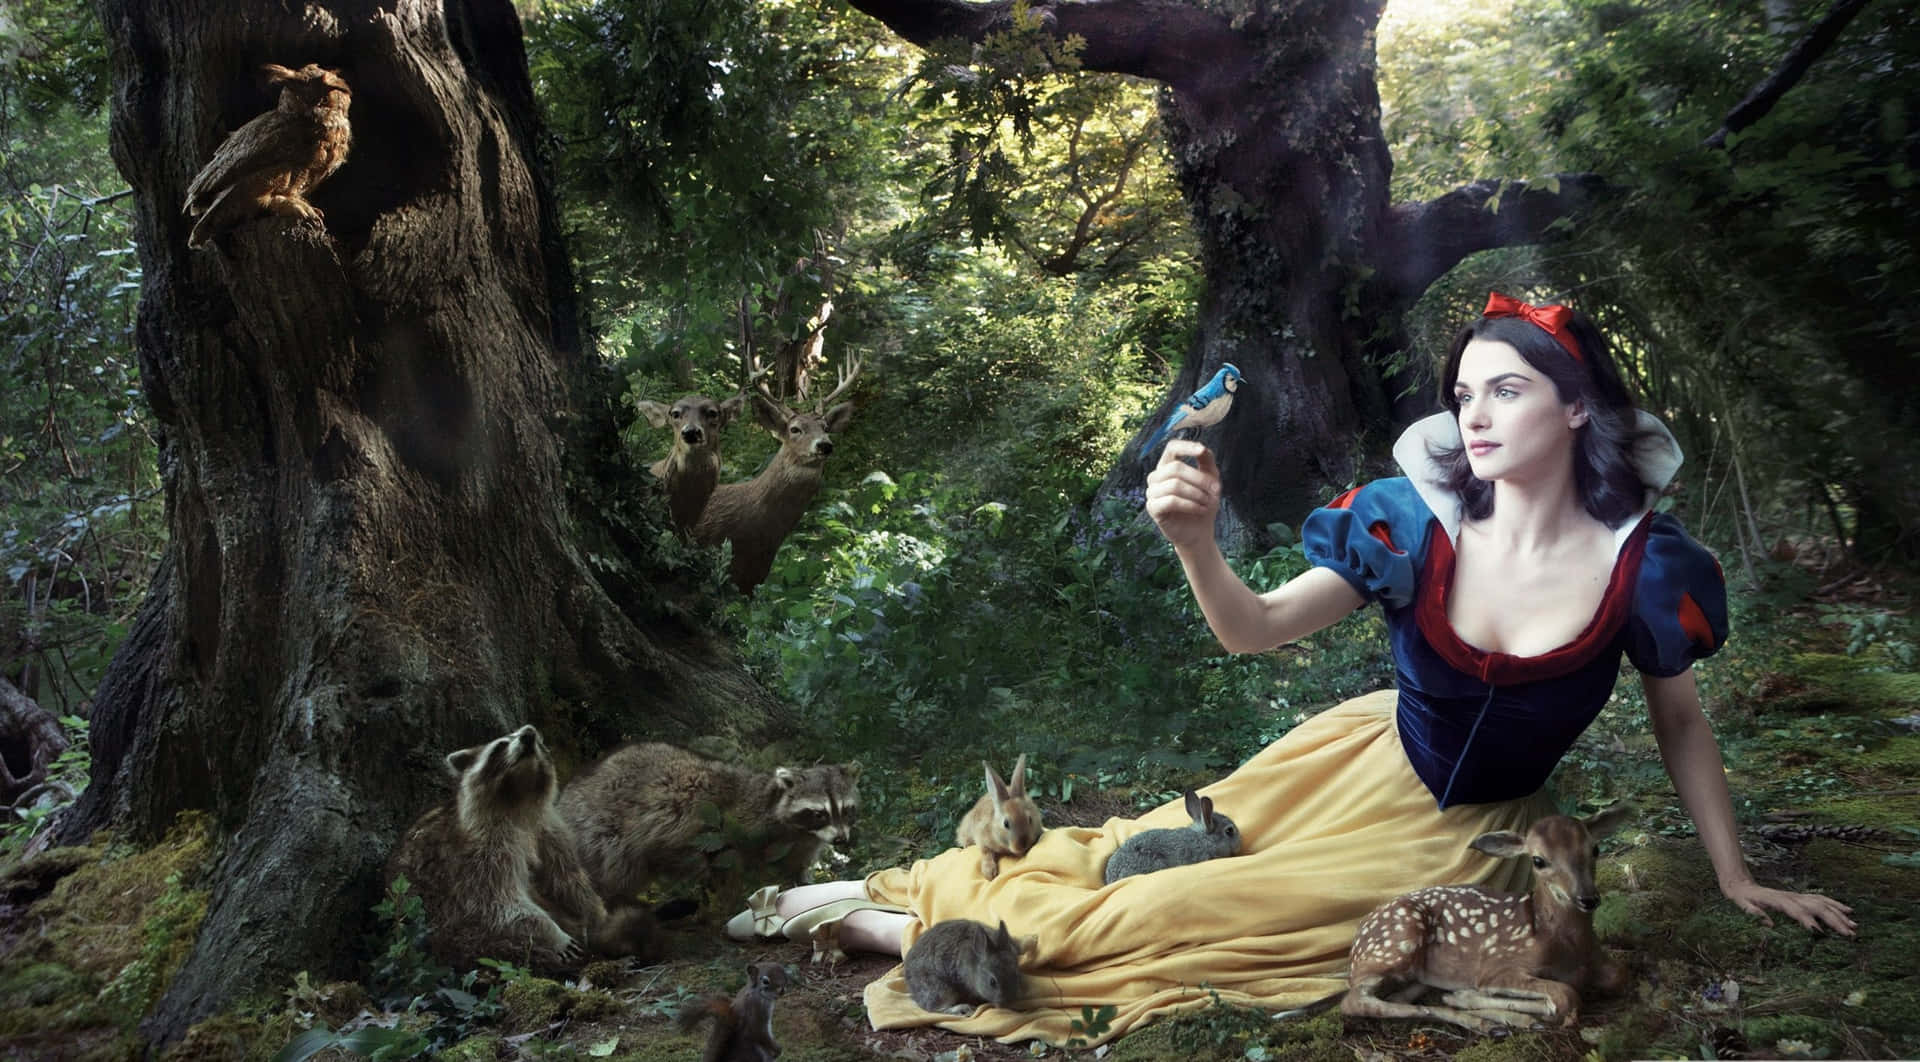 Snow White surrounded by nature in a fairytale forest